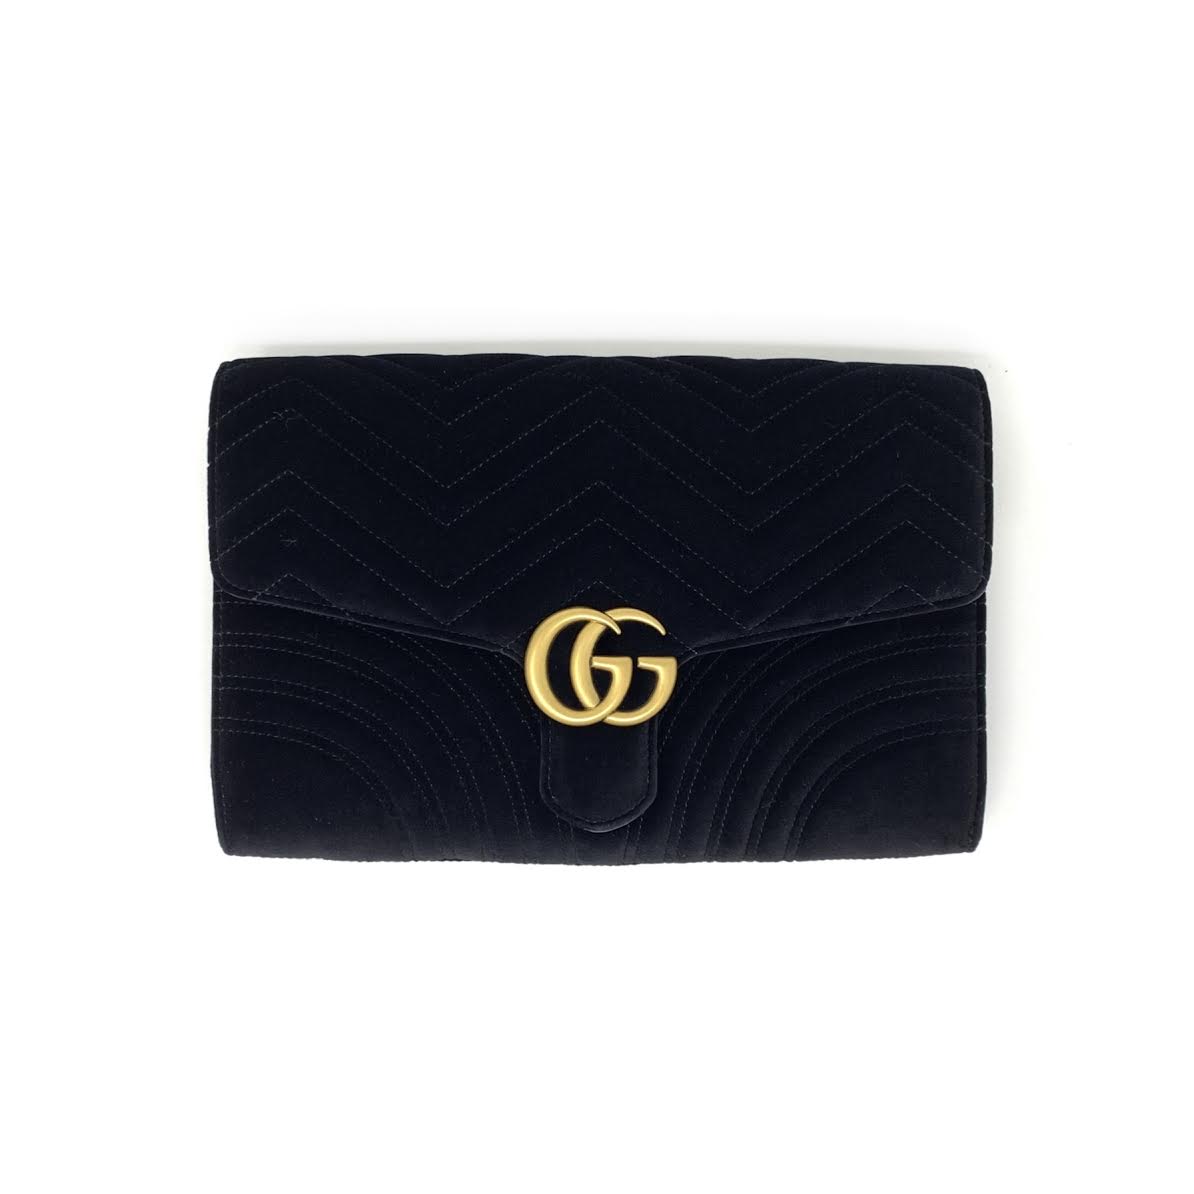 GG Marmont matelassé keychain wallet in blue leather